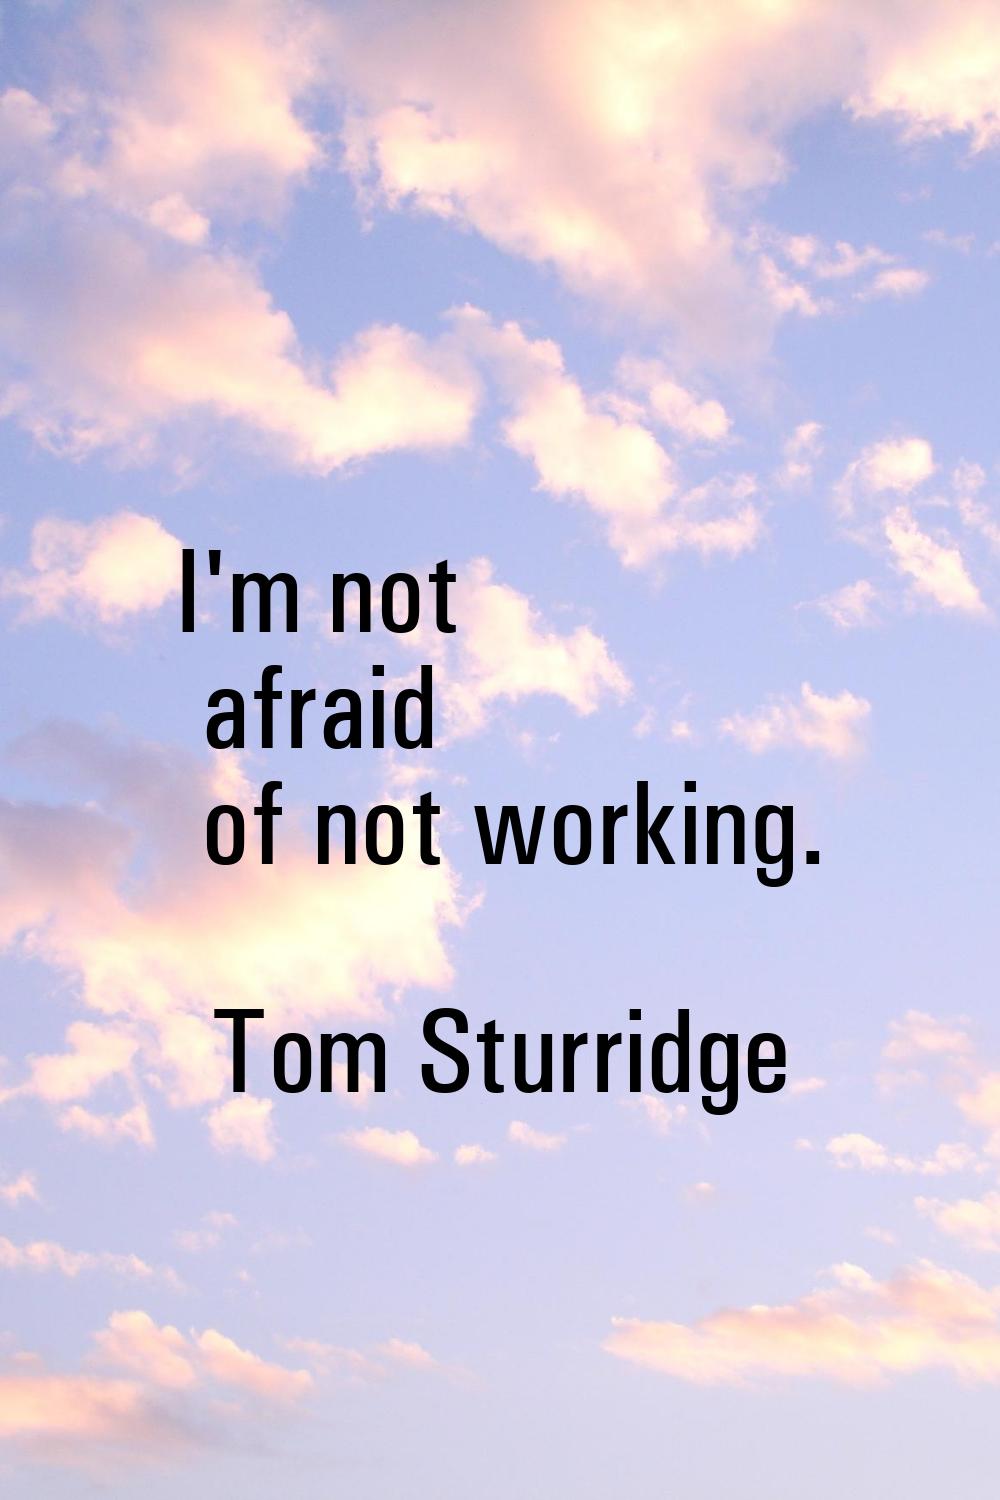 I'm not afraid of not working.